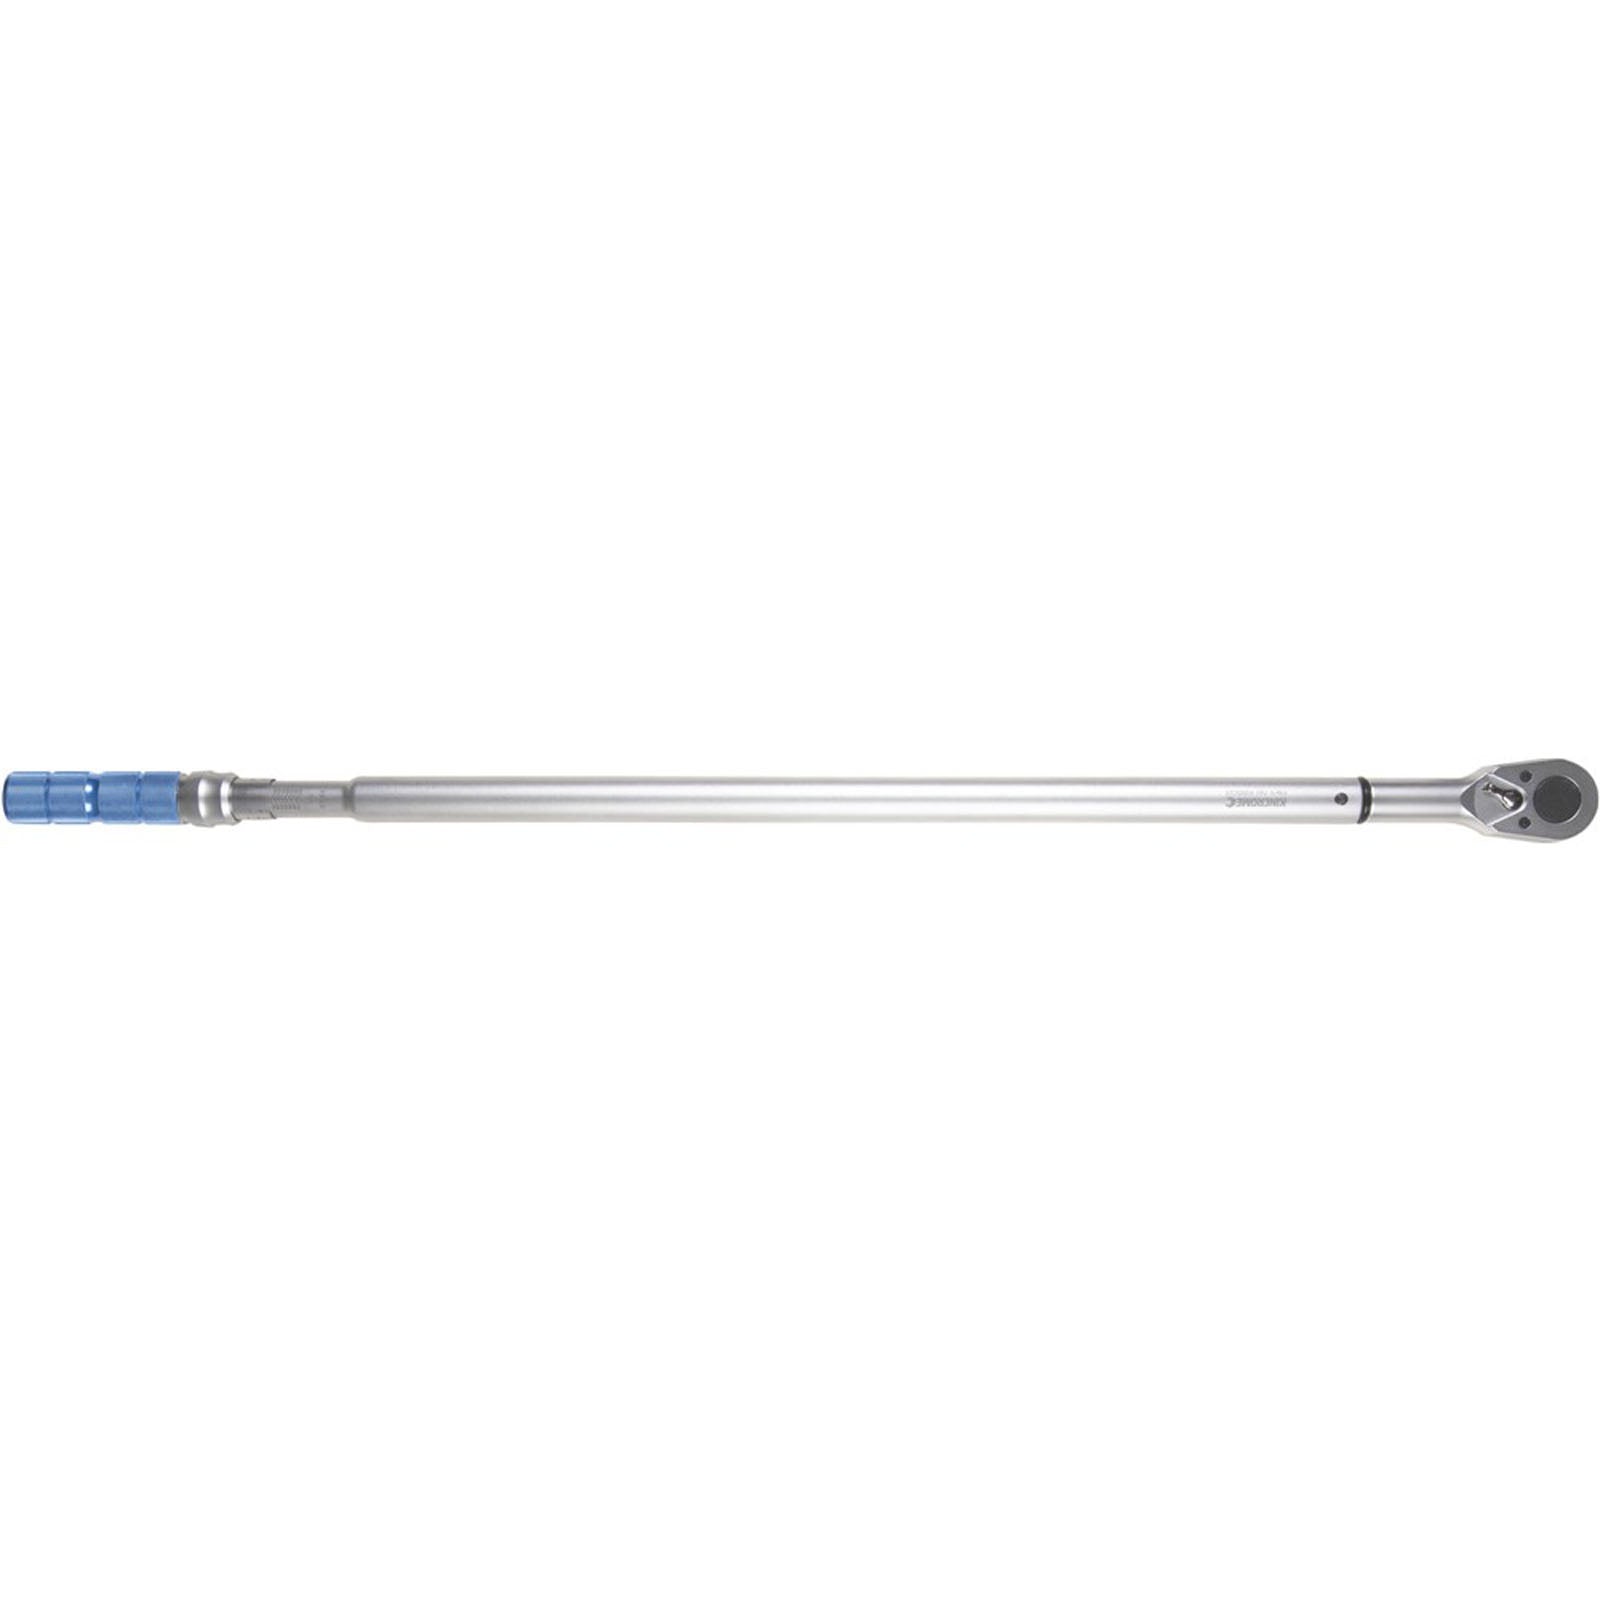 3/4" Torque Wrench 150-750N·m - K8503 by Kincrome